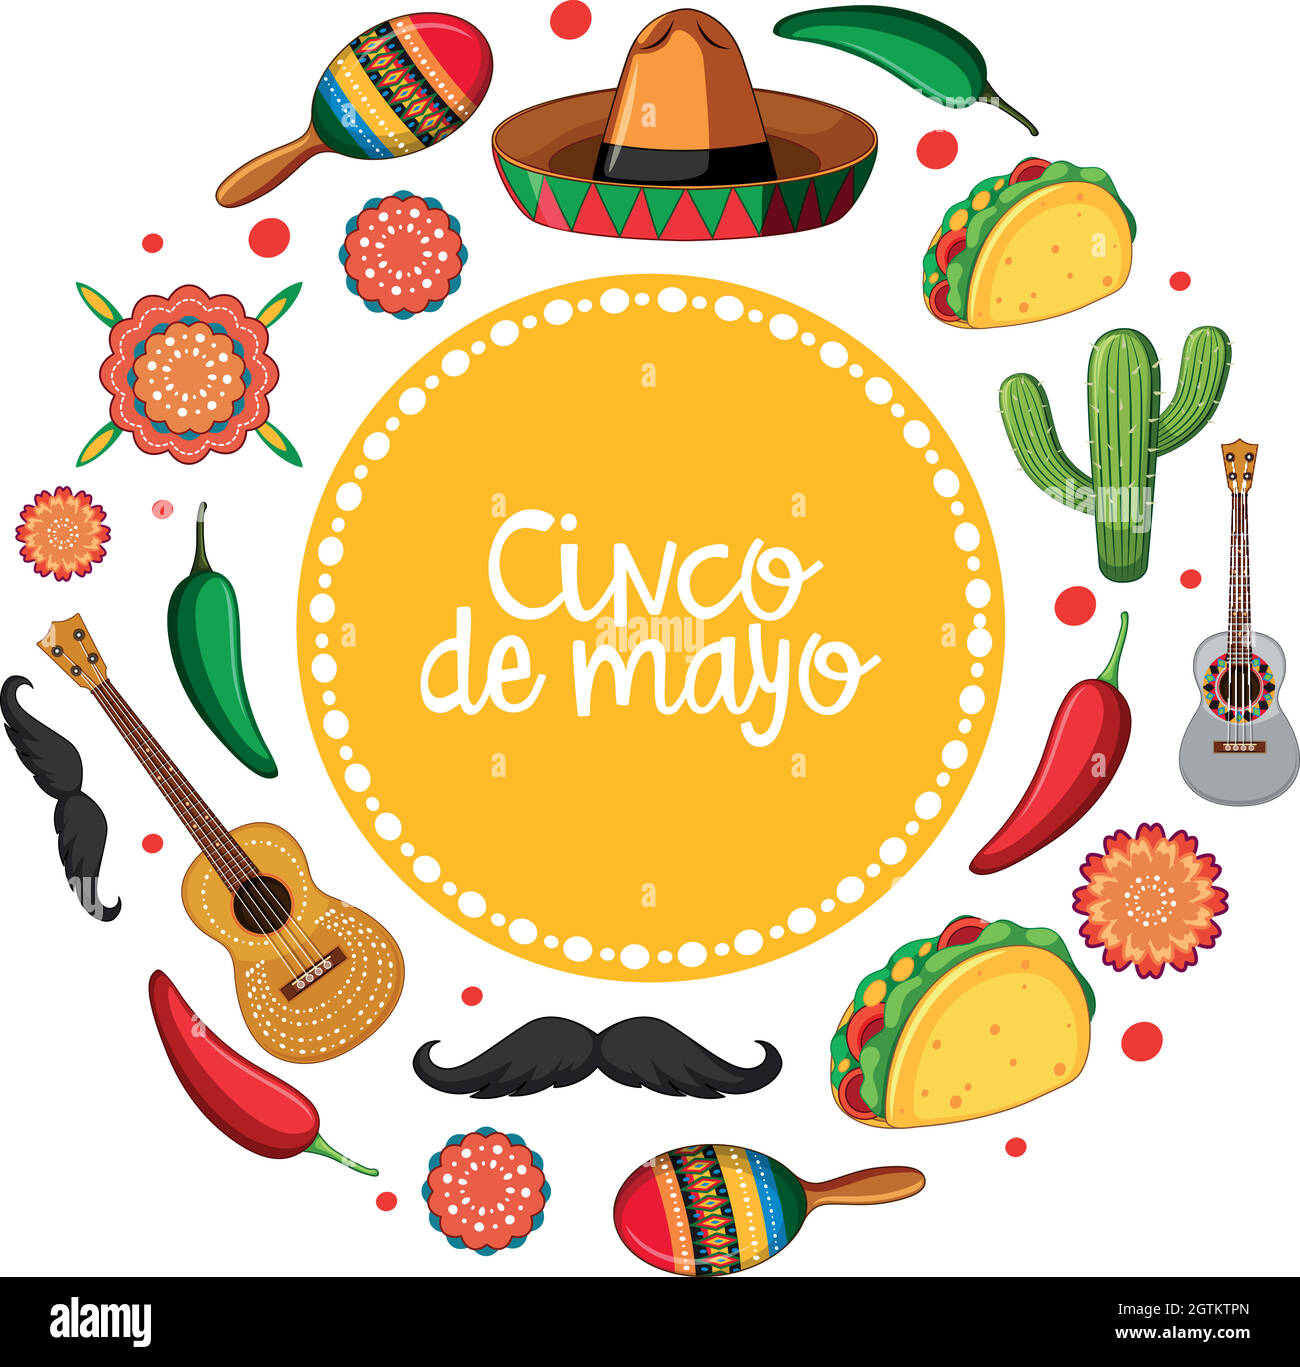 Cinco de mayo card template with mexican musical instruments Stock Vector